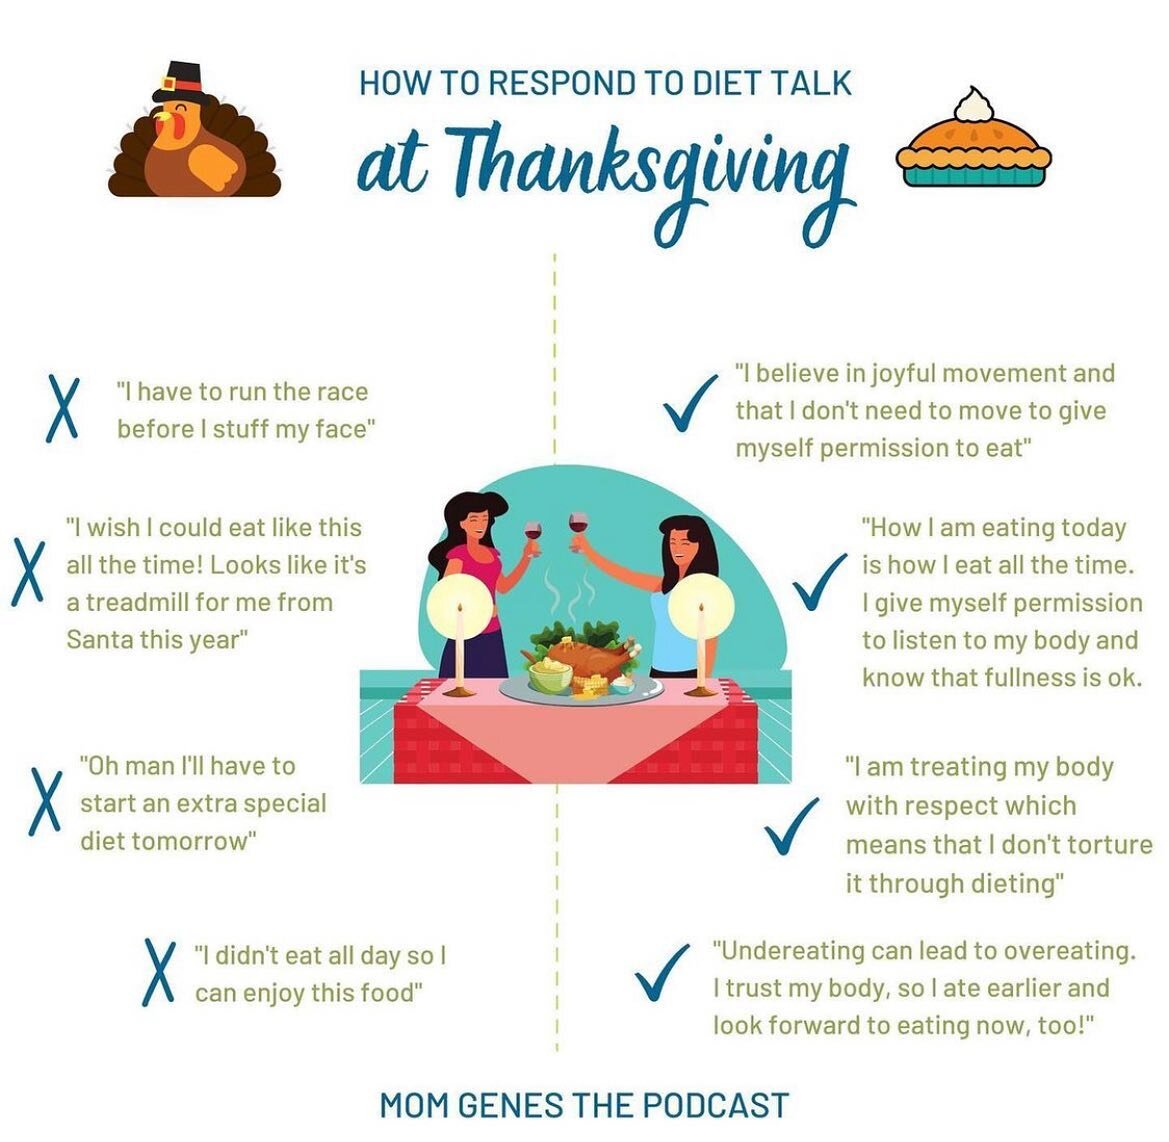 We get it:
⁣
🦃 those awkward comments around the buffet
⁣
🛑 the diet talk that won&rsquo;t stop
⁣
⚖️ the family member that looks super skinny this year
⁣
🥧 the food that is discussed as a &ldquo;treat&rdquo; when it&rsquo;s just...pie
⁣
🍽 the ta